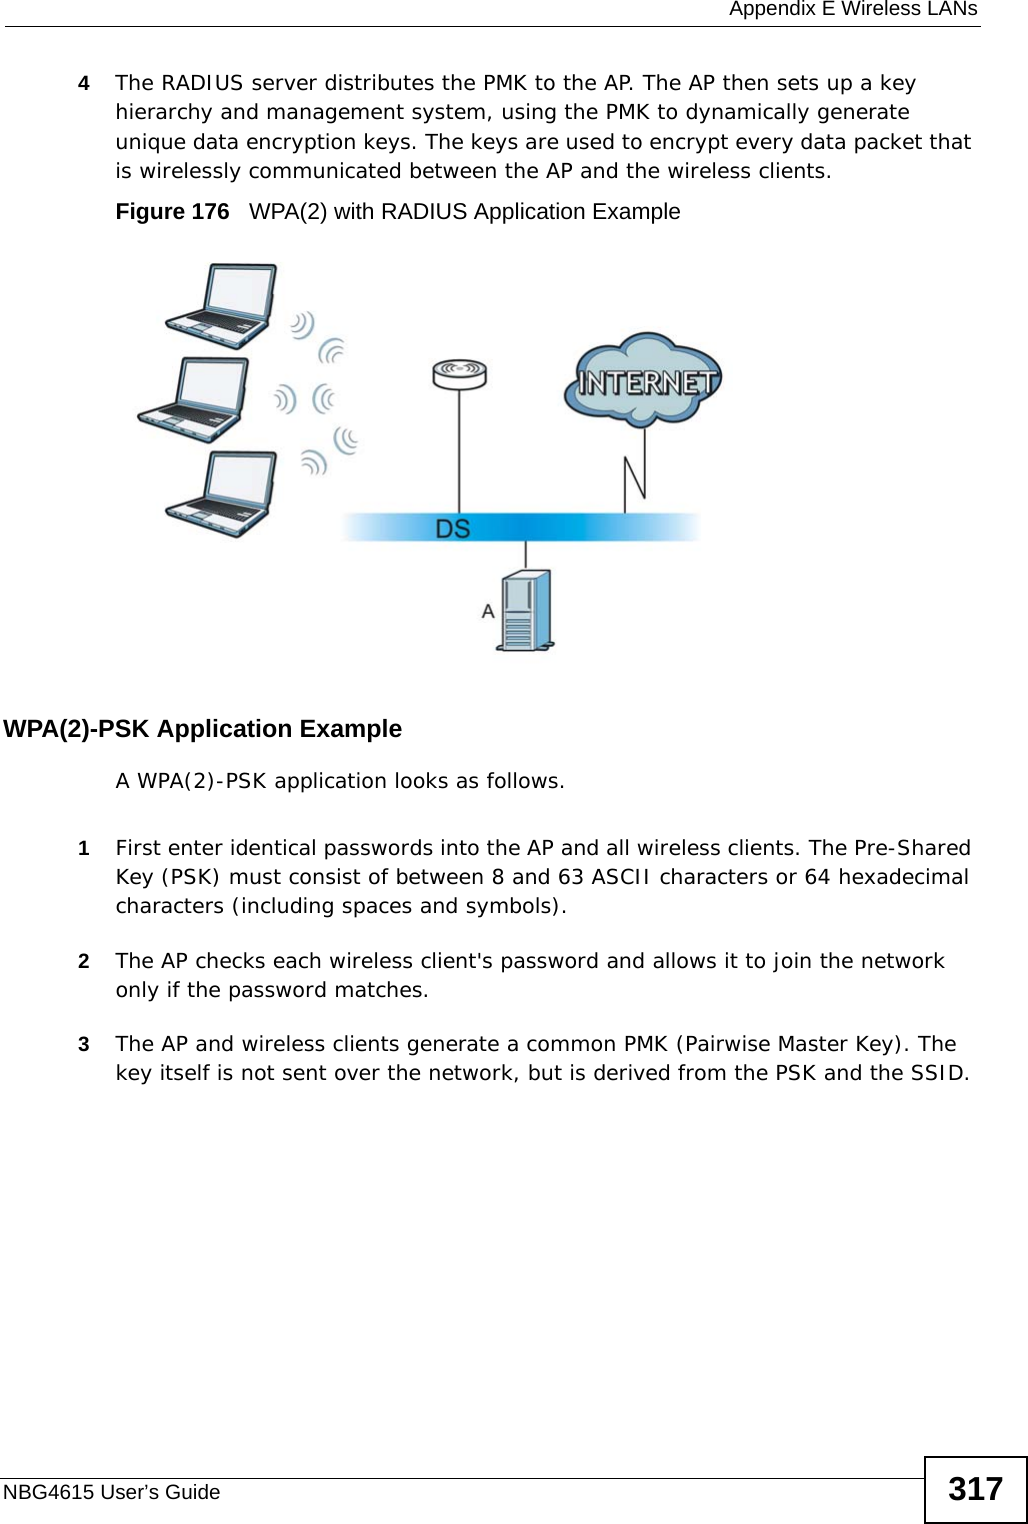  Appendix E Wireless LANsNBG4615 User’s Guide 3174The RADIUS server distributes the PMK to the AP. The AP then sets up a key hierarchy and management system, using the PMK to dynamically generate unique data encryption keys. The keys are used to encrypt every data packet that is wirelessly communicated between the AP and the wireless clients.Figure 176   WPA(2) with RADIUS Application ExampleWPA(2)-PSK Application ExampleA WPA(2)-PSK application looks as follows.1First enter identical passwords into the AP and all wireless clients. The Pre-Shared Key (PSK) must consist of between 8 and 63 ASCII characters or 64 hexadecimal characters (including spaces and symbols).2The AP checks each wireless client&apos;s password and allows it to join the network only if the password matches.3The AP and wireless clients generate a common PMK (Pairwise Master Key). The key itself is not sent over the network, but is derived from the PSK and the SSID. 